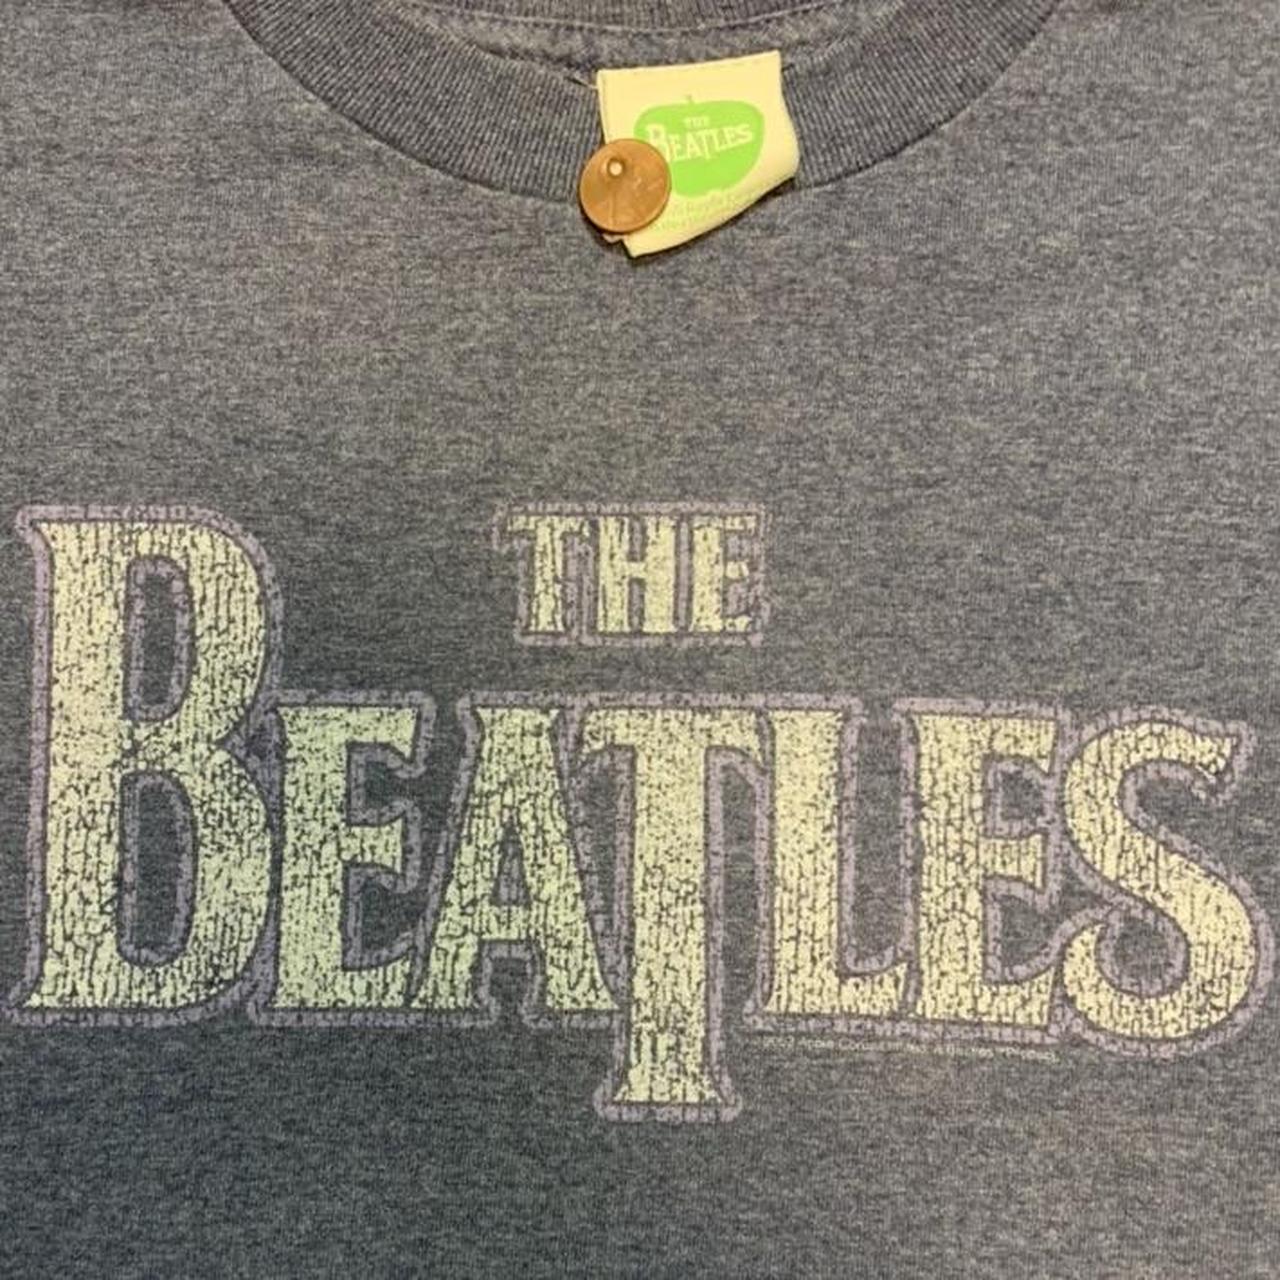 Product Image 2 - The Beatles Tee 2005 

Size: